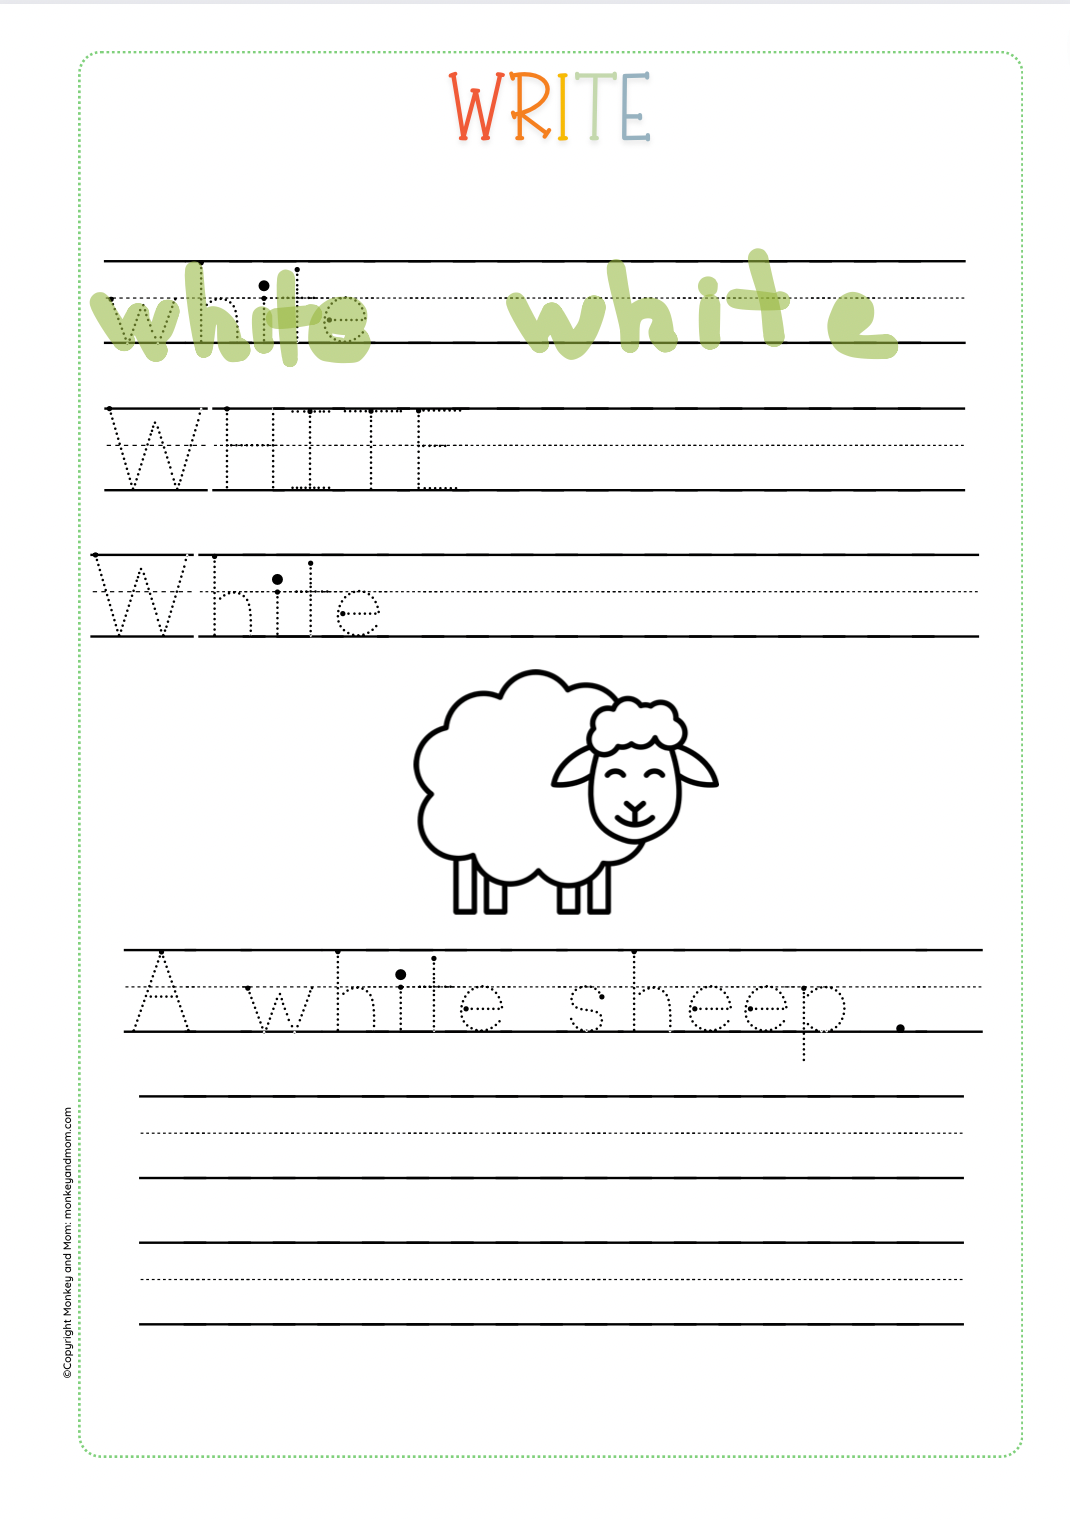 I know my colors - Color reading workbook - PreK (learn colors)